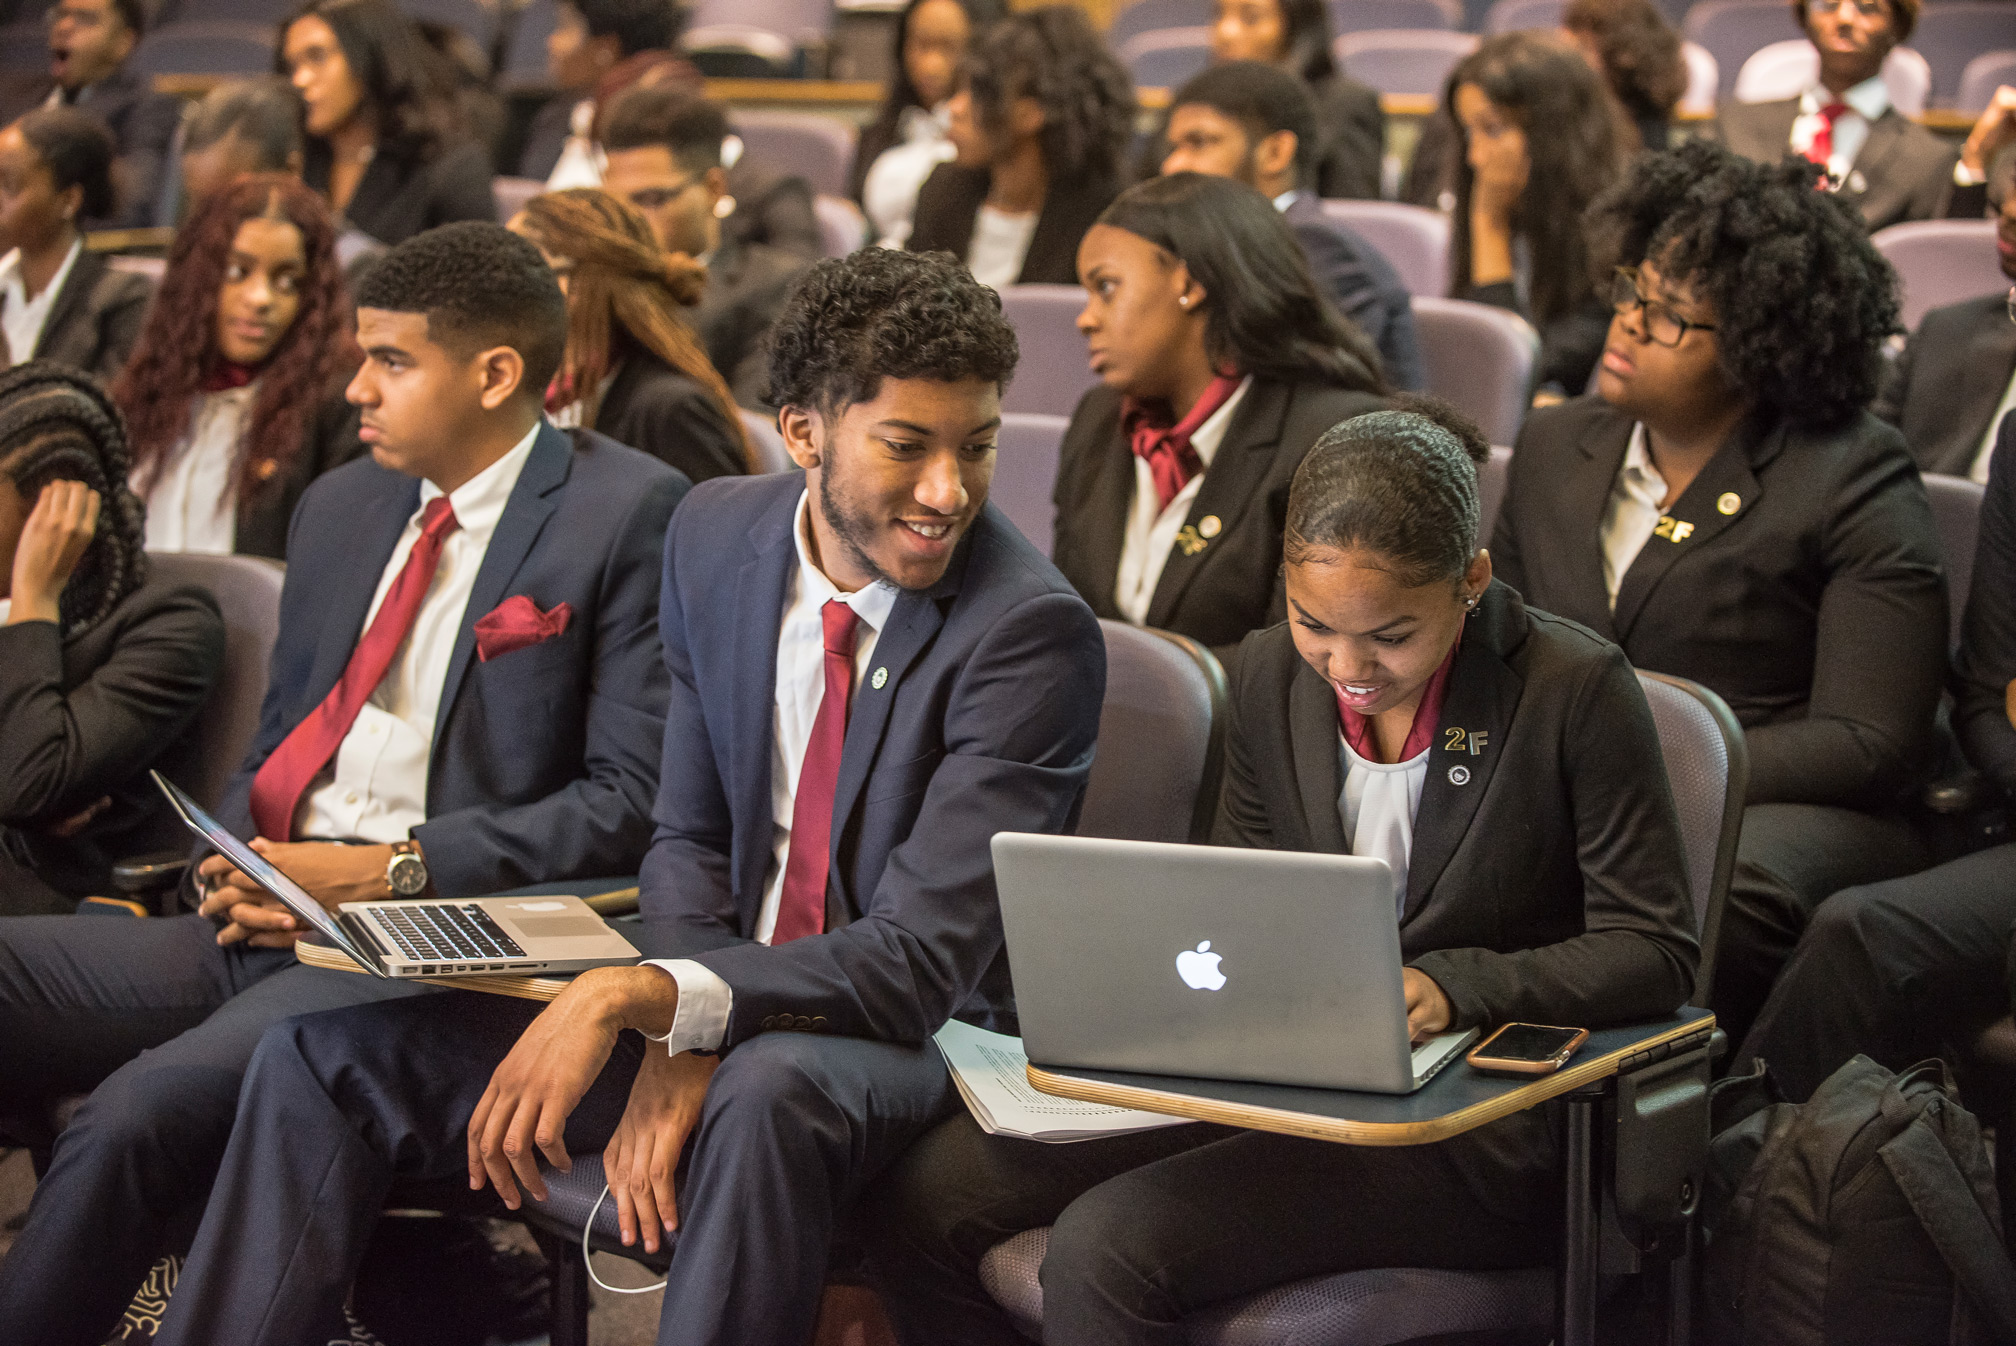 Students in suits sitting in an auditorium.